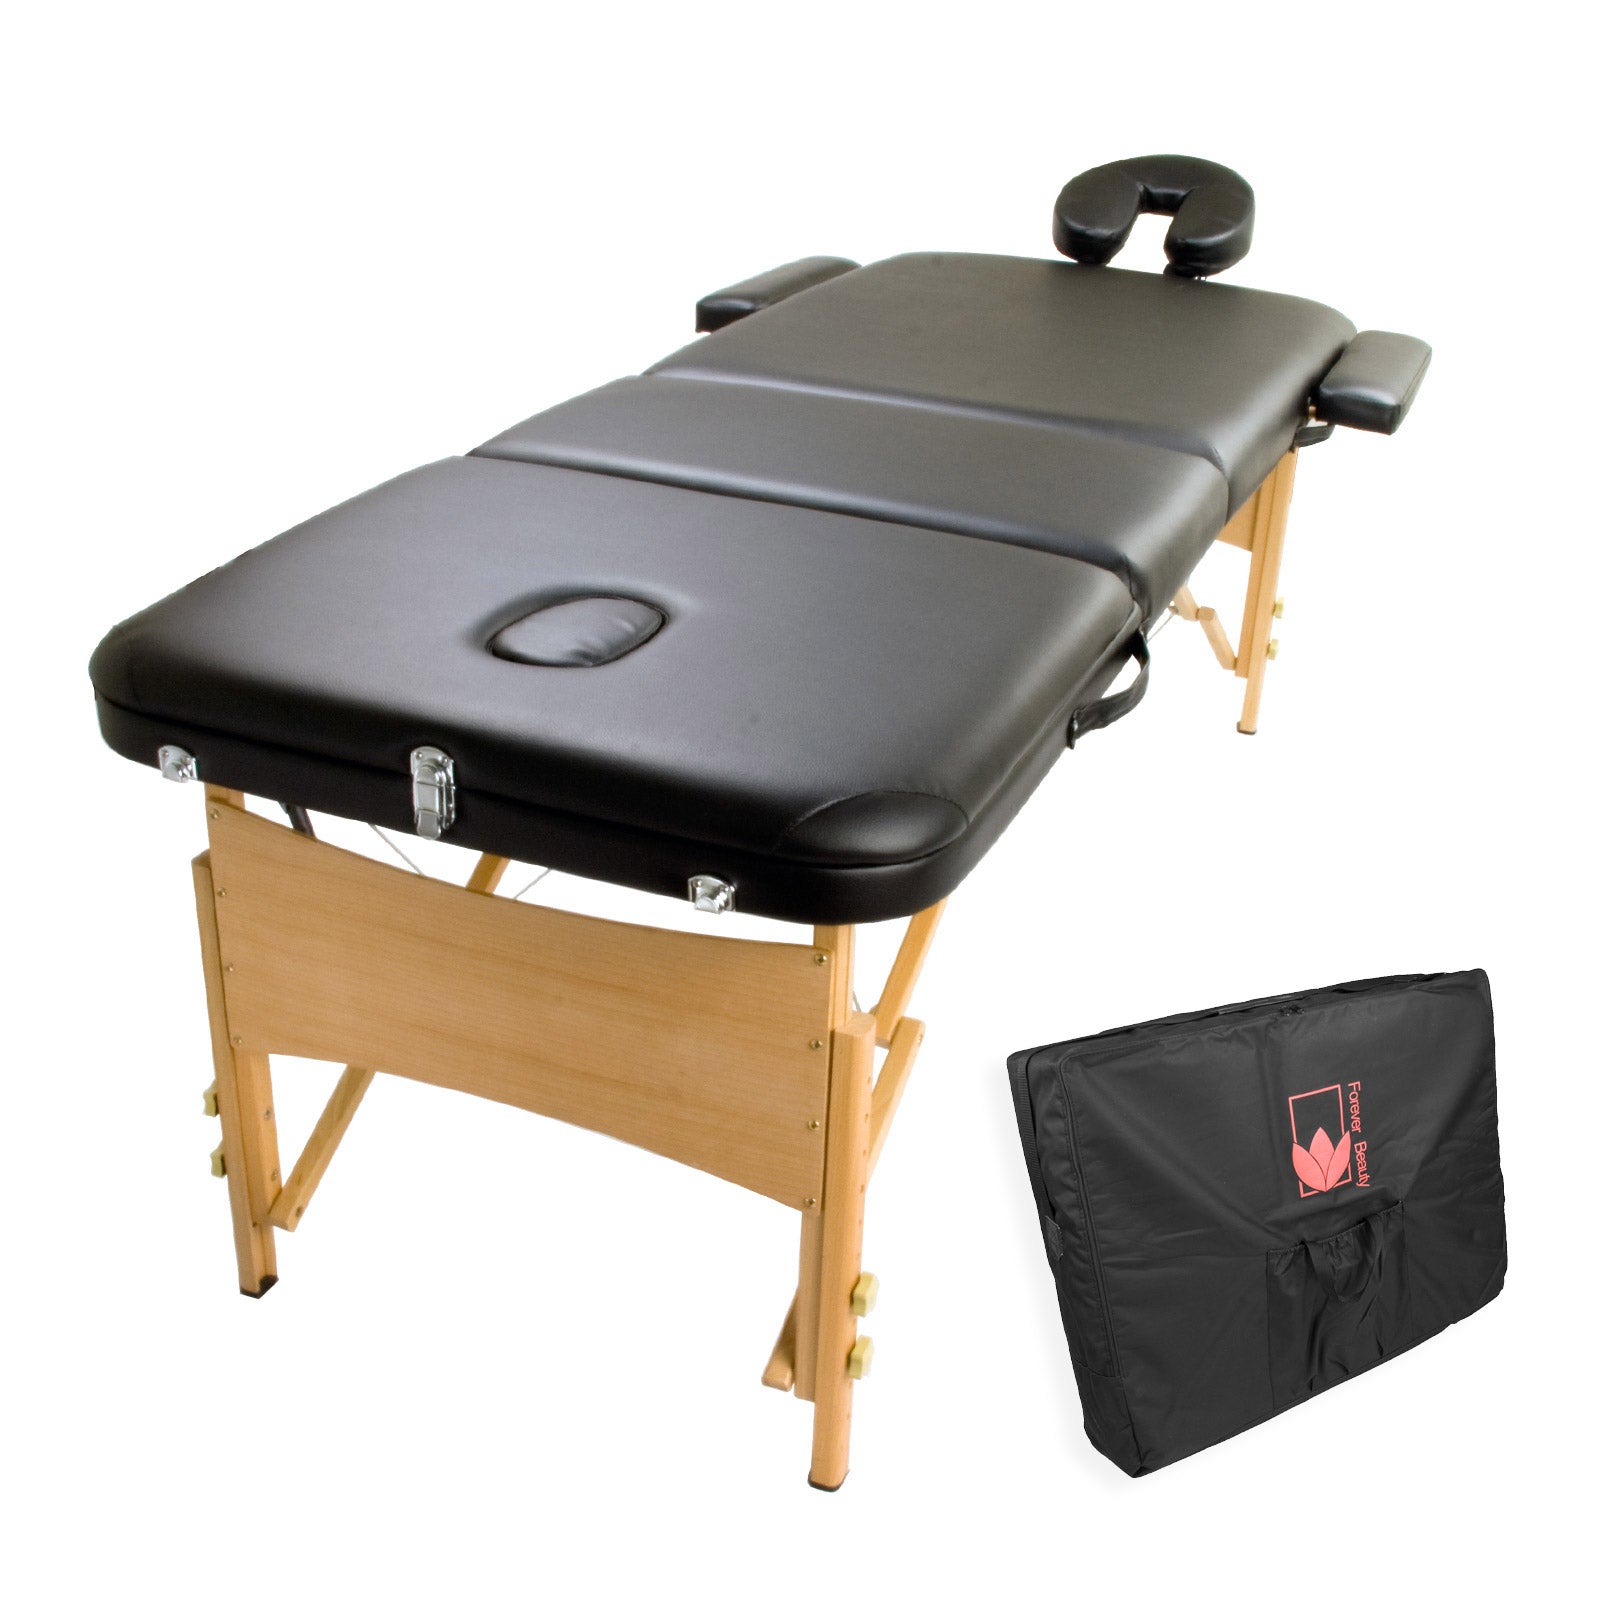 Forever Beauty Black Portable Massage Table Bed Therapy Waxing 3 Fold 70cm Wooden - SILBERSHELL